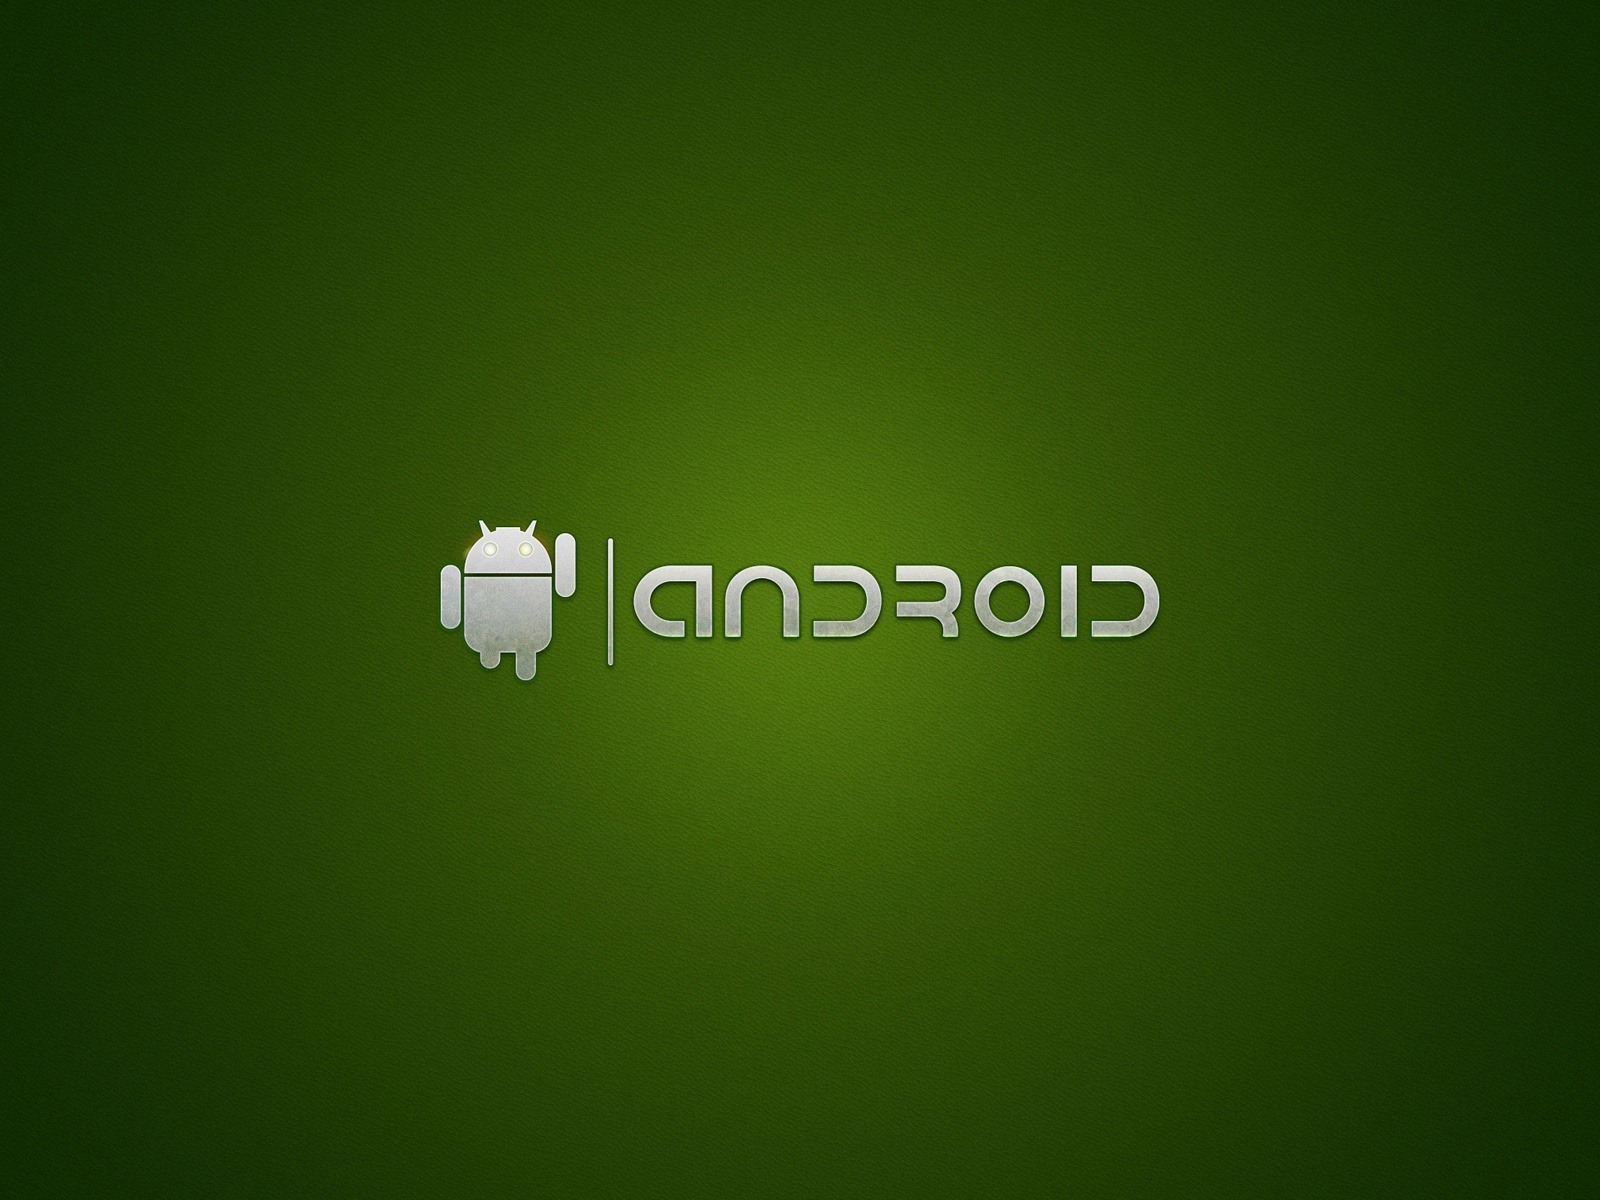 Android for 1600 x 1200 resolution